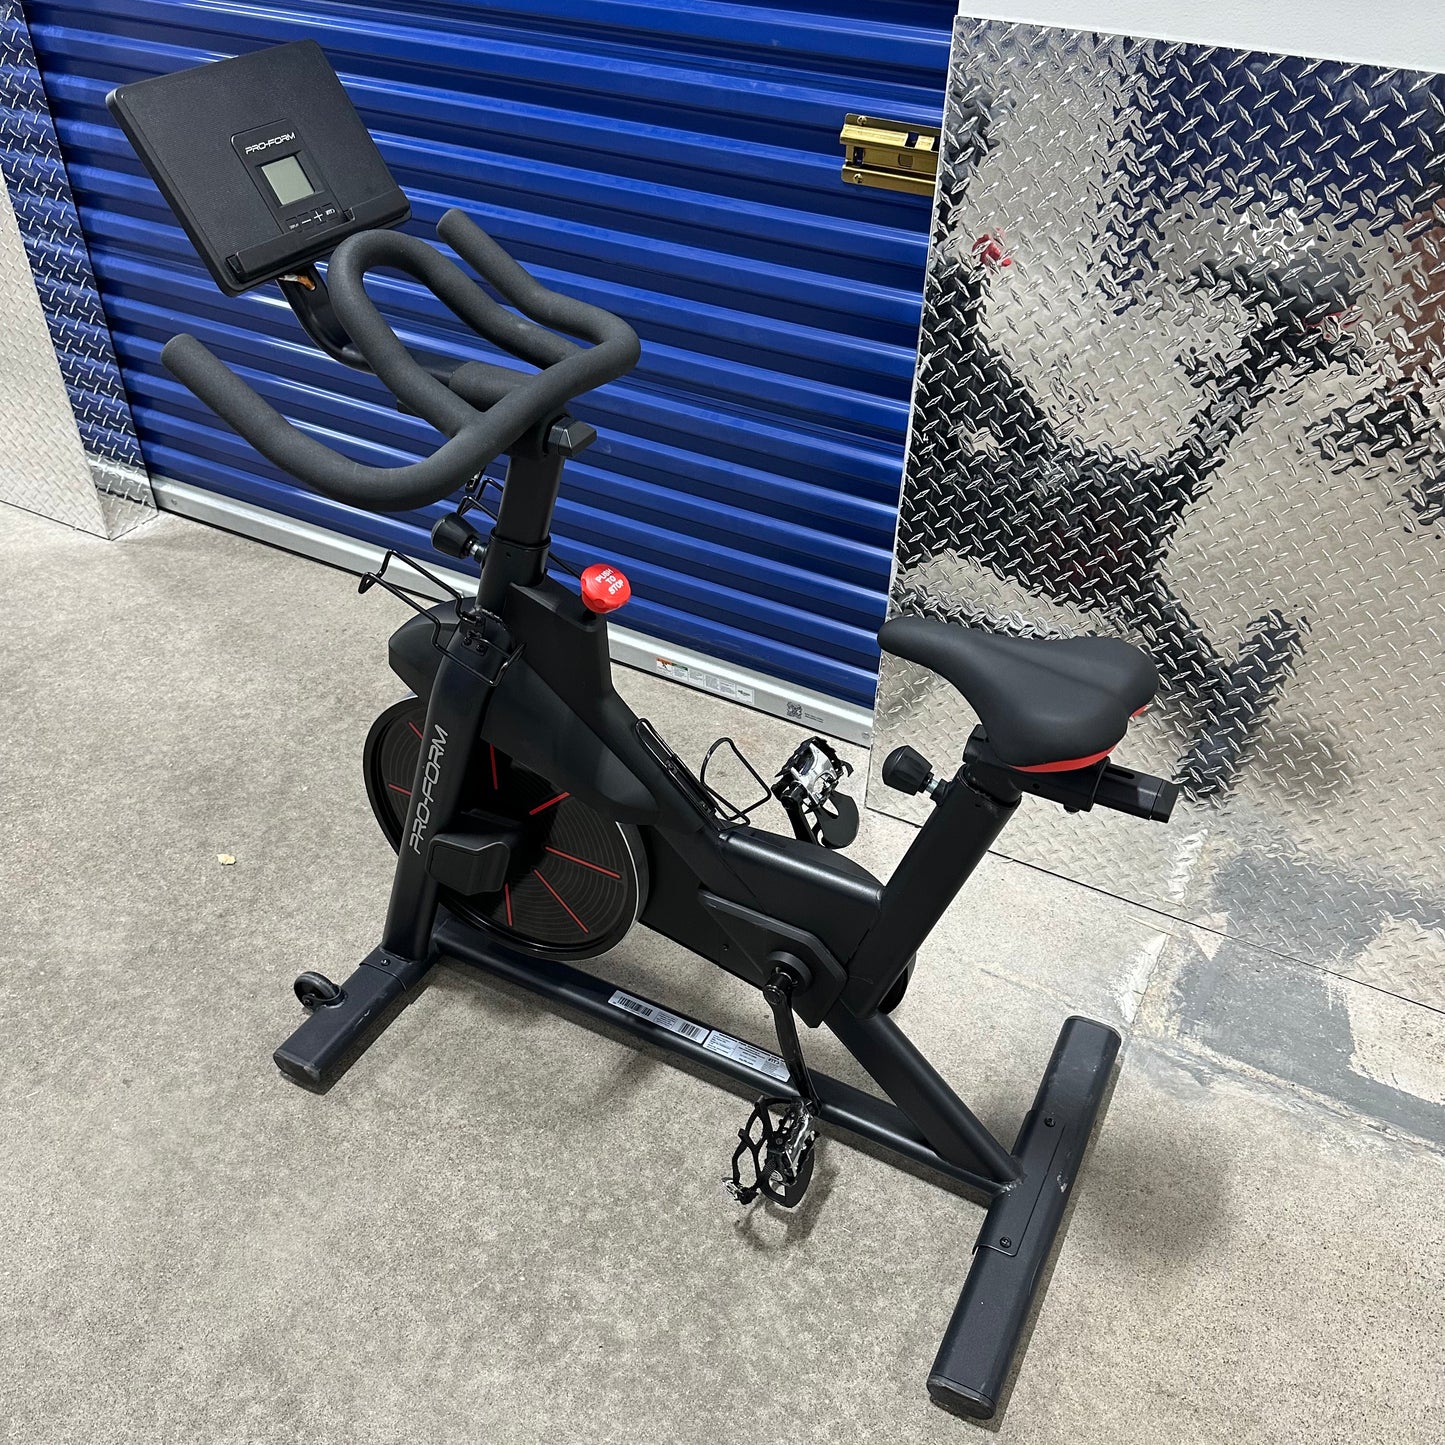 ProForm 500 SPX Exercise Bike - iFit membership required